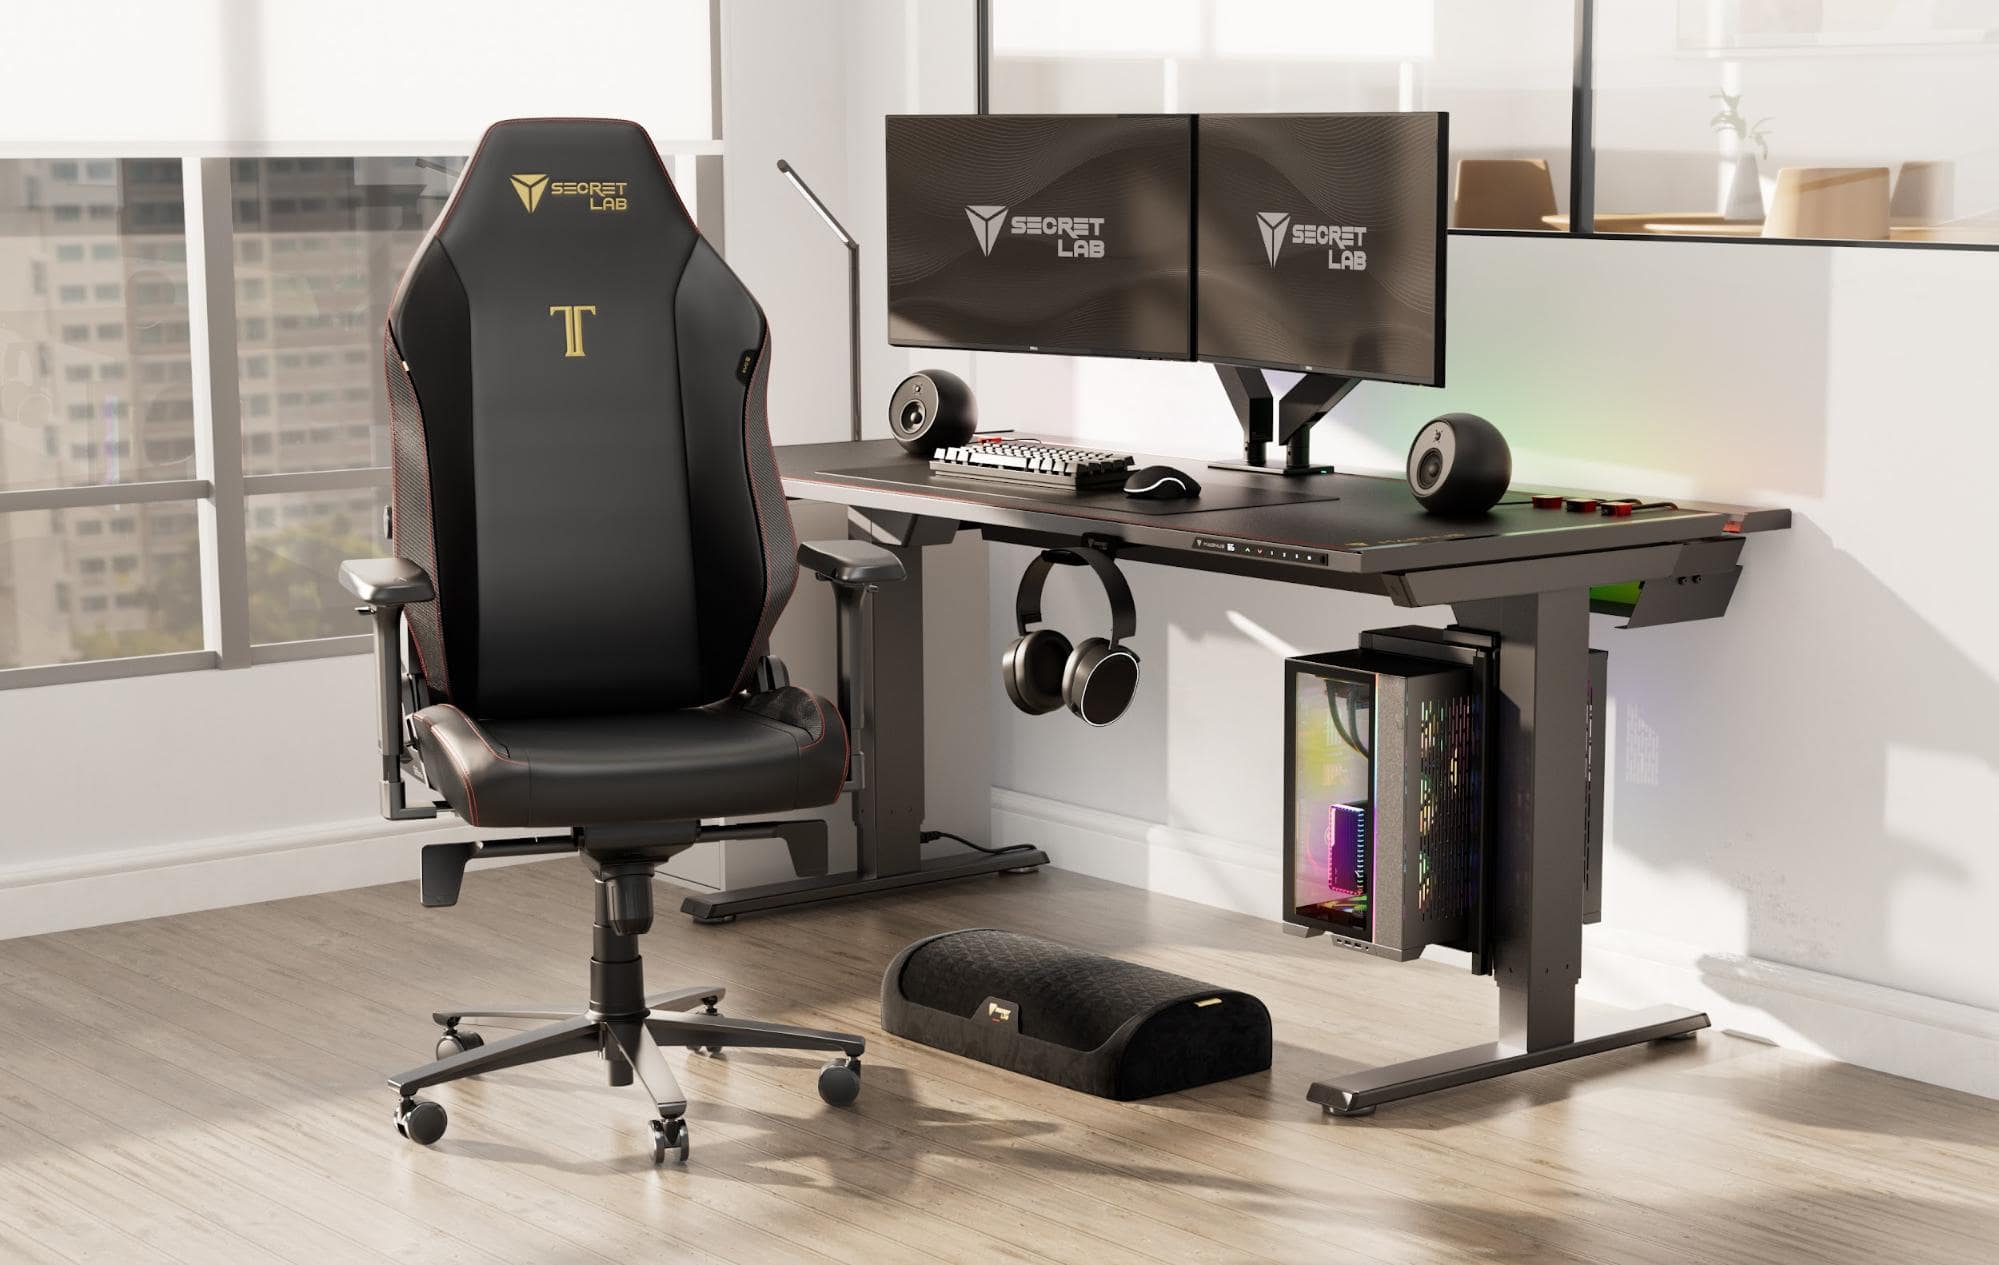 New leatherette for Secretlab chairs - gaming